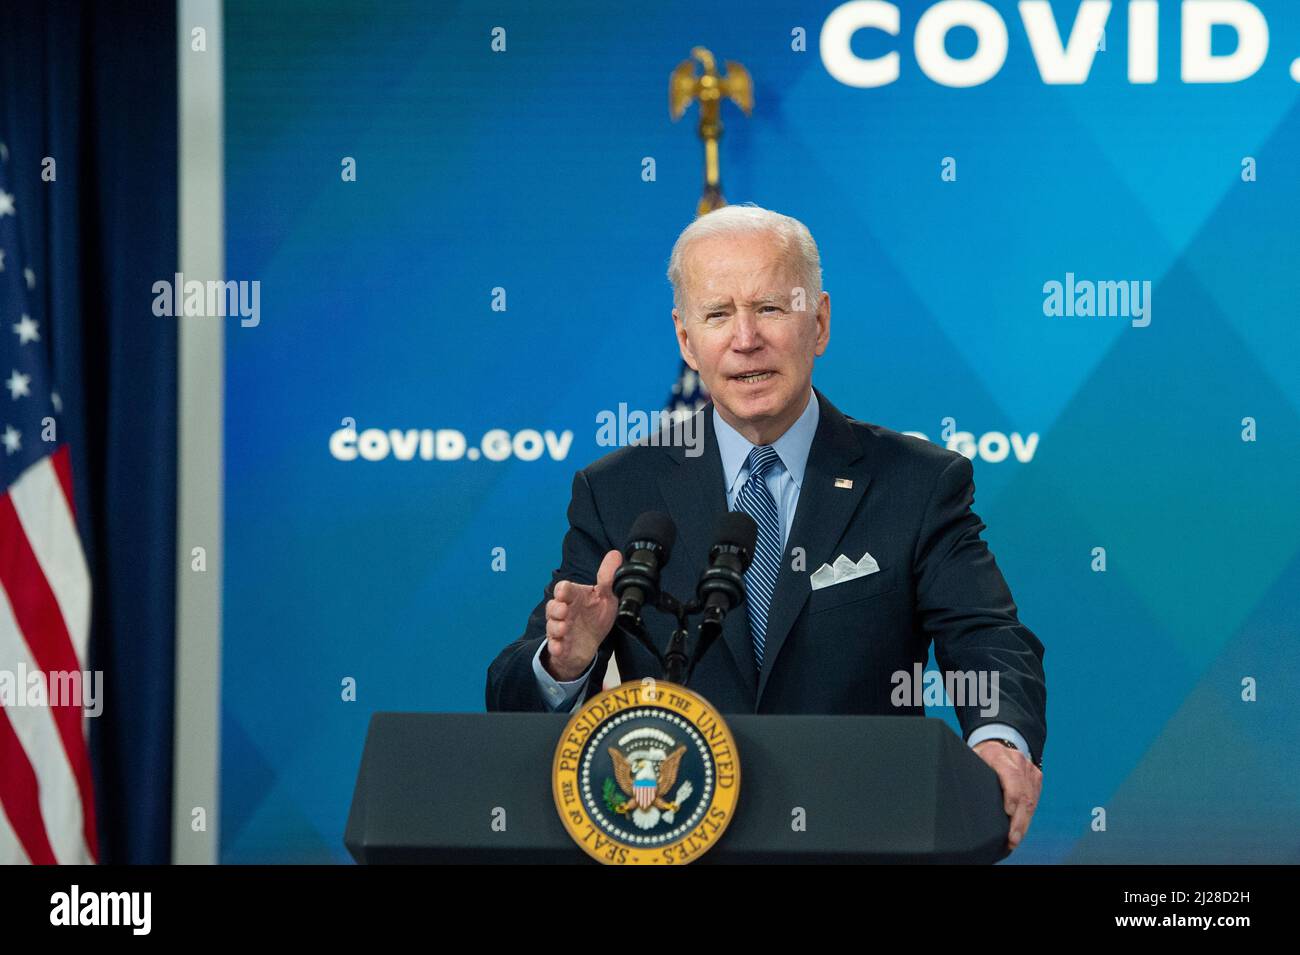 United States President Joe Biden delivers remarks on the status of the country's fight against COVID-19, in the South Court Auditorium of the Eisenhower Executive Office Building on the White House campus in Washington, DC, Wednesday, March 30, 2022. Credit: Rod Lamkey/Pool via CNP /MediaPunch Stock Photo